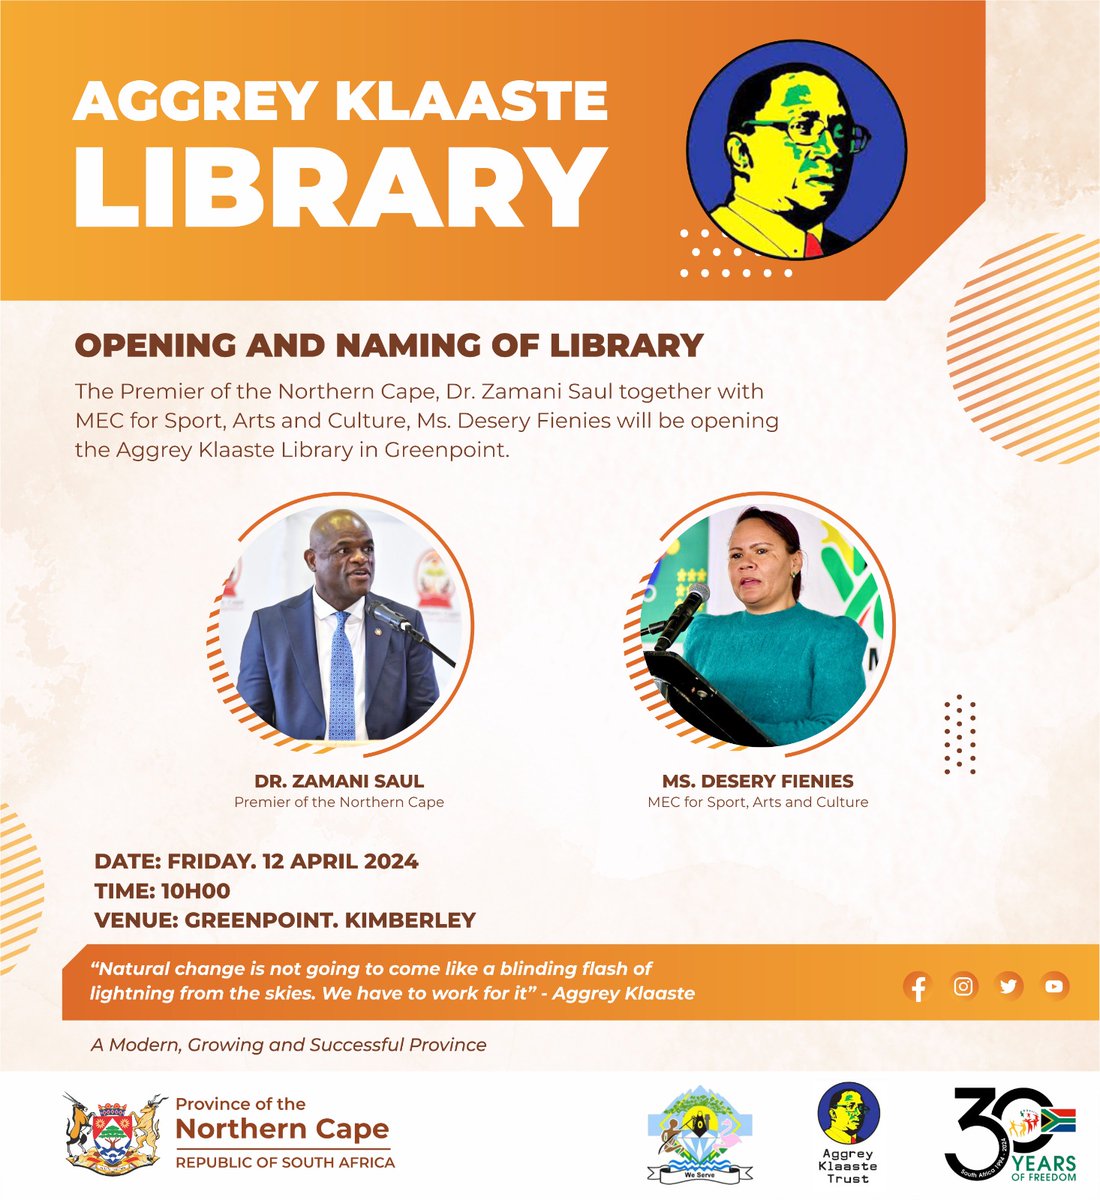 Opening of a new library in Greenpoint, Kimberley, on Friday 12 April 2024🥰🥰🥰